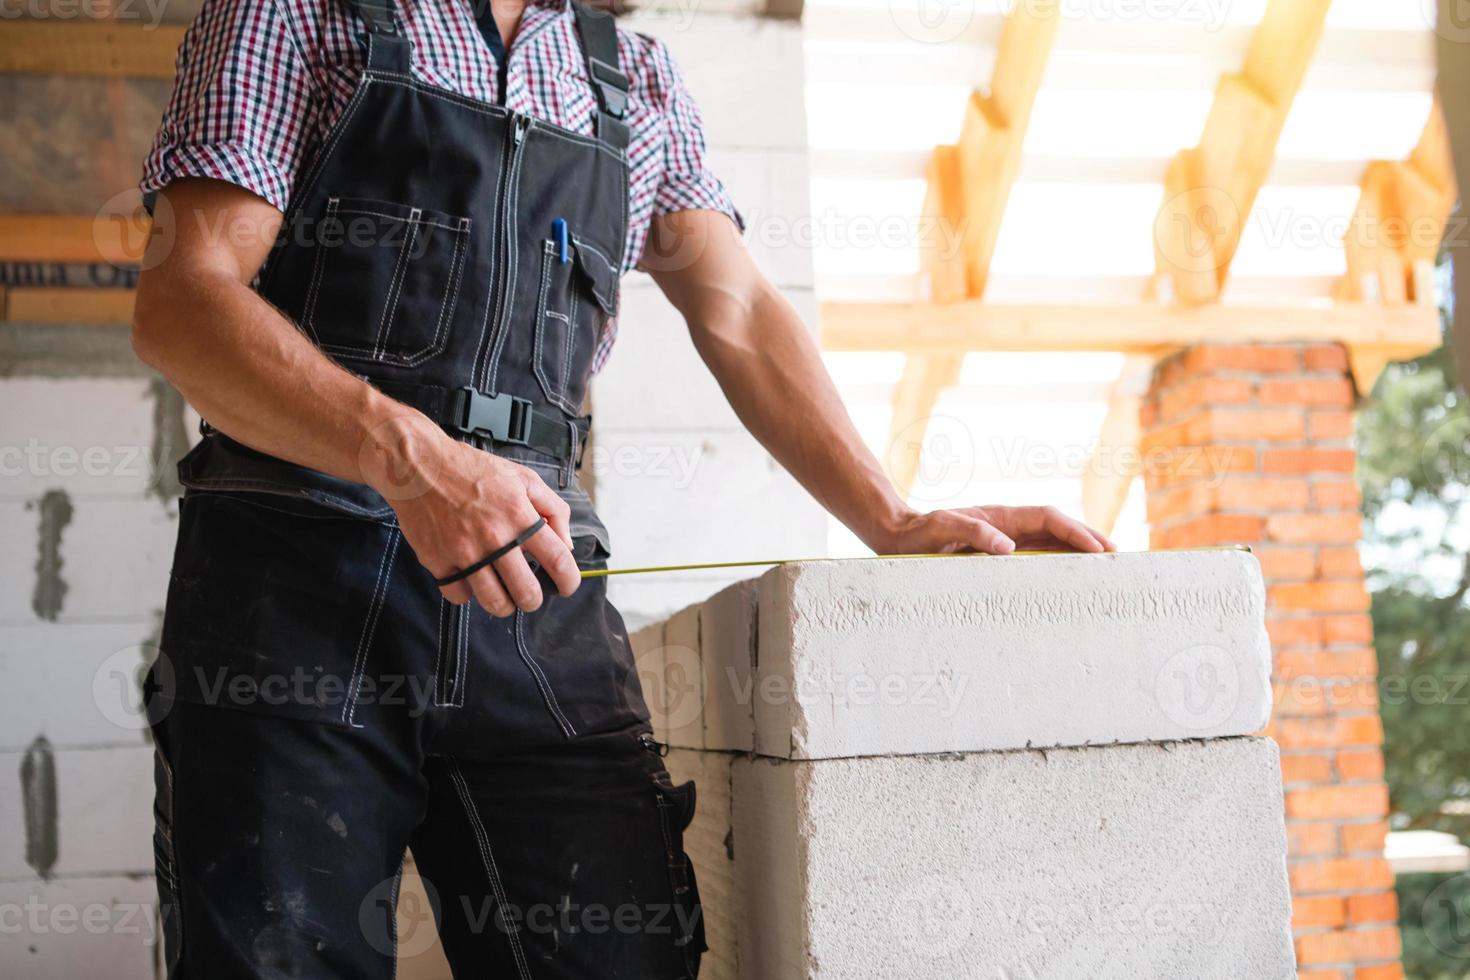 Construction worker at construction site measures the length of window opening and brick wall with tape measure. Cottage are made of porous concrete blocks, work clothes - jumpsuit and baseball cap photo